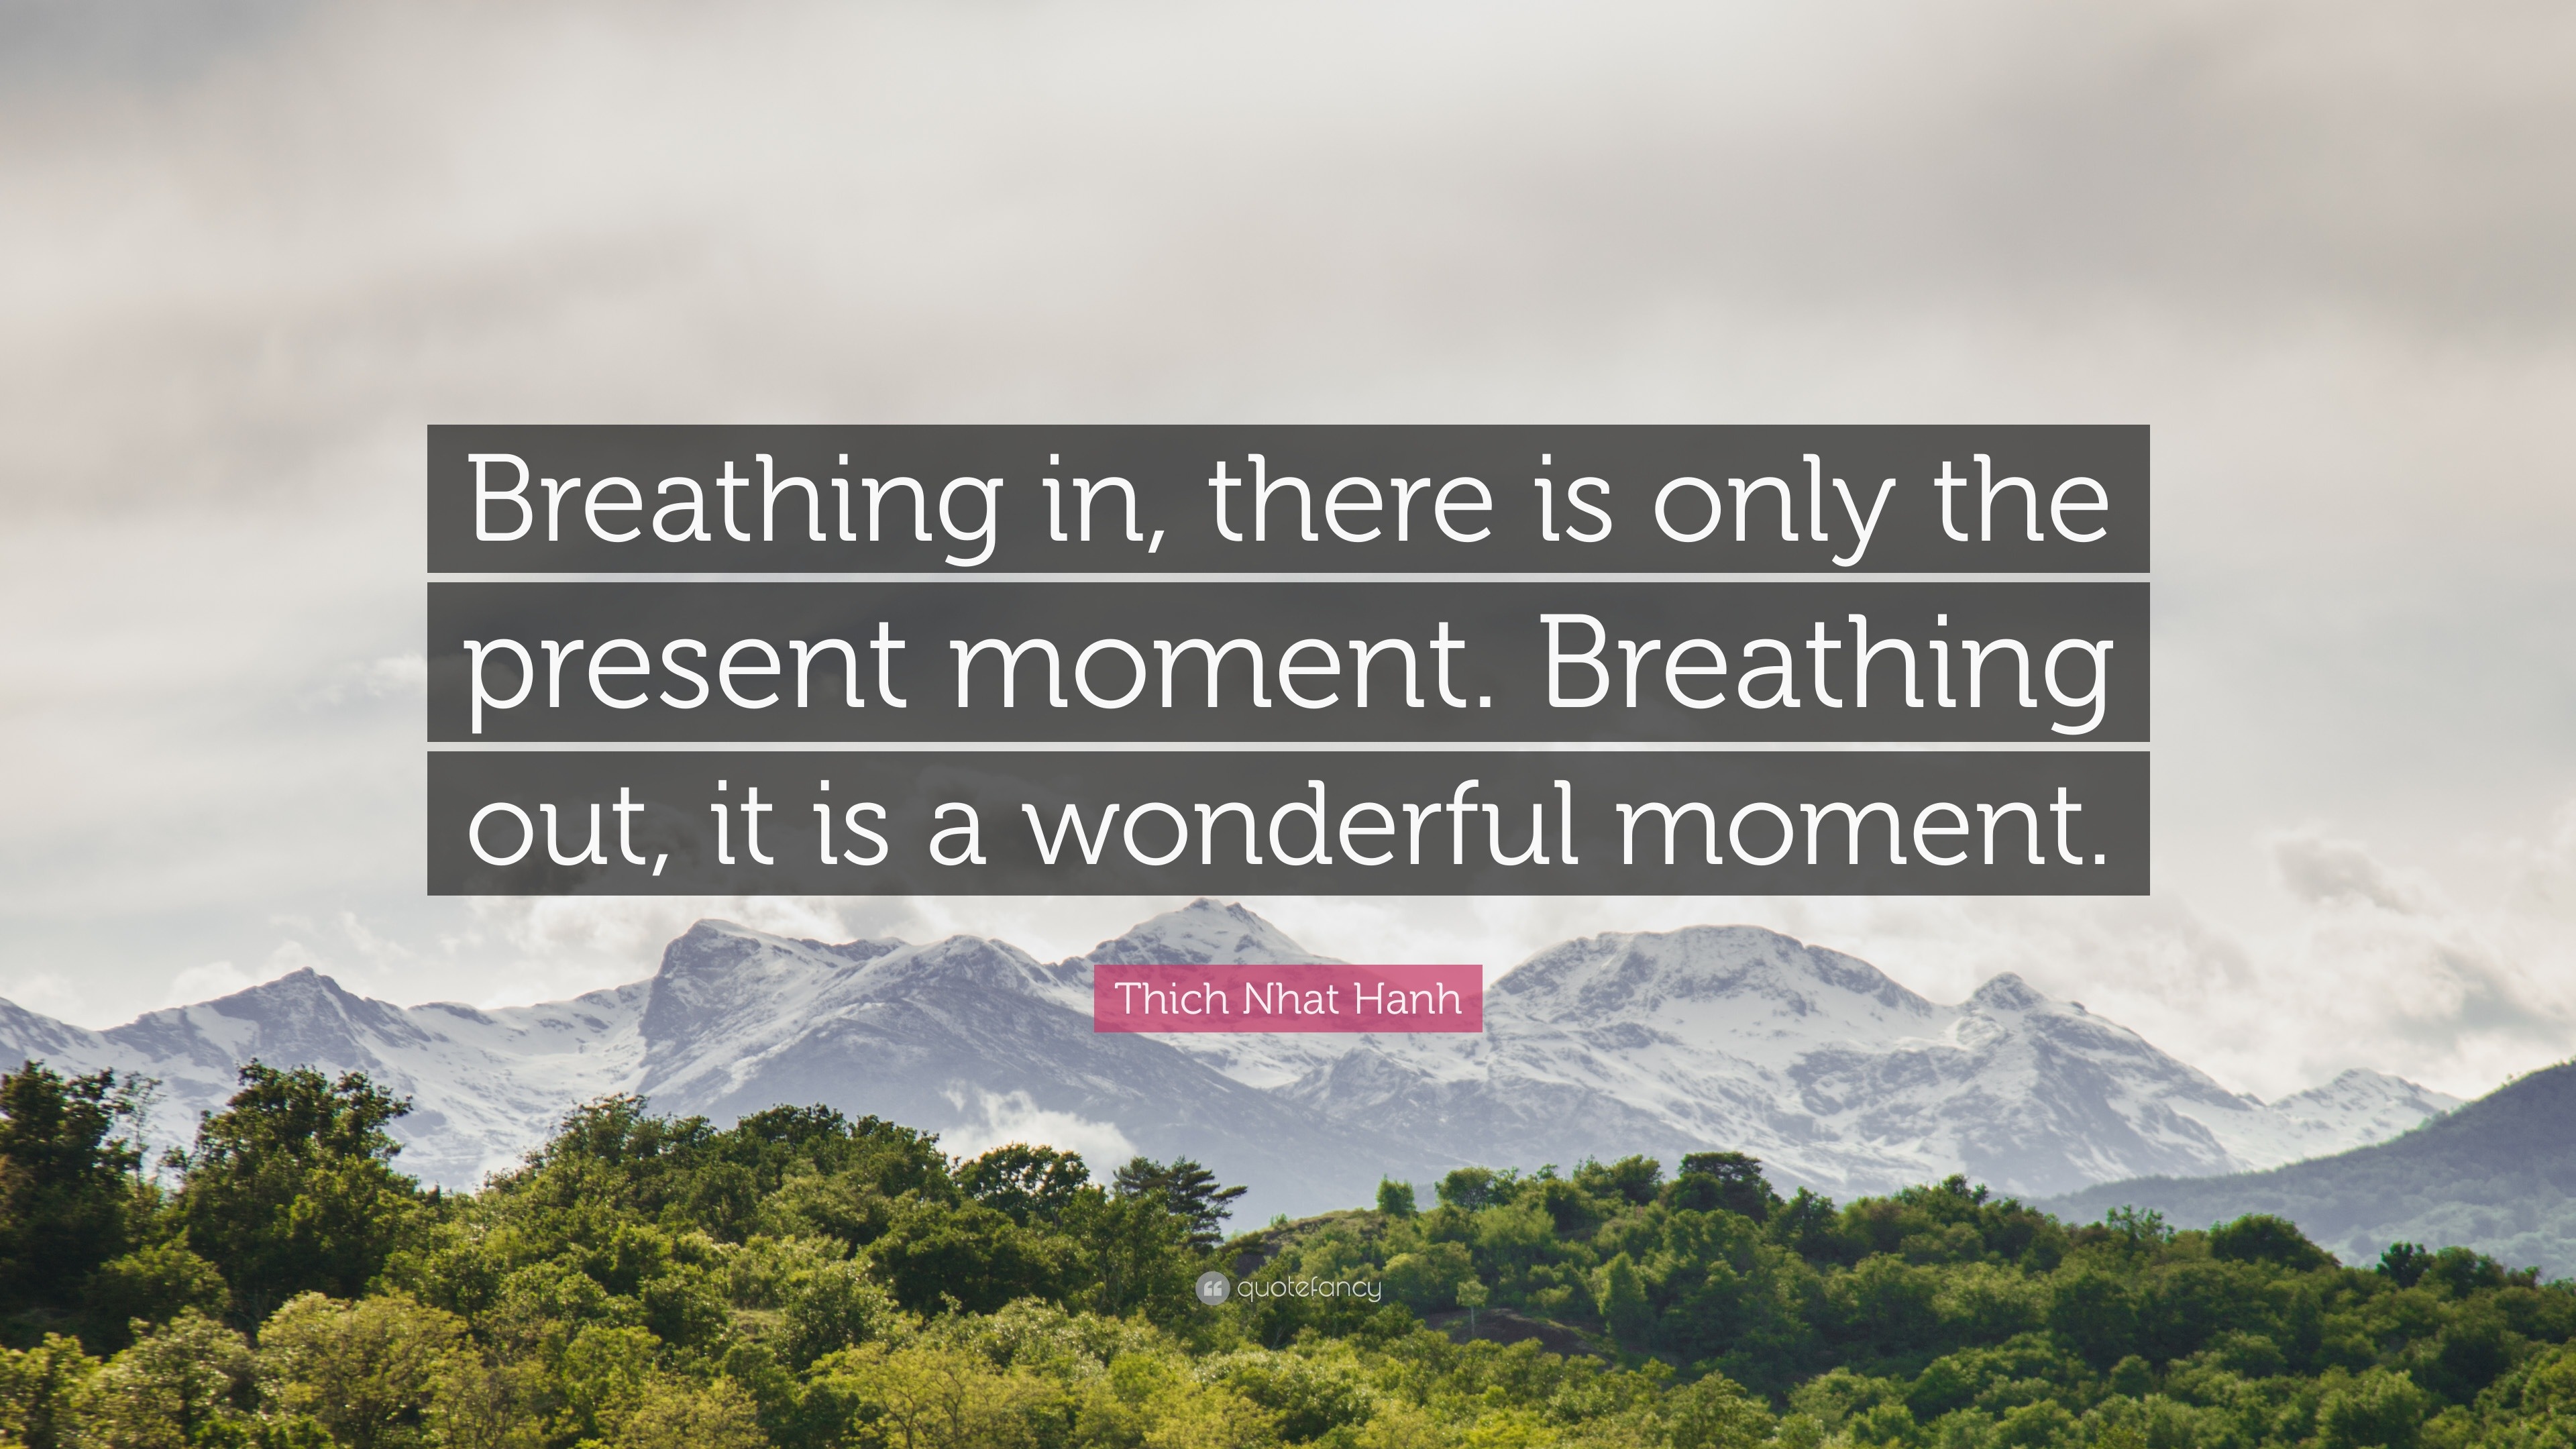 50 Inspiring Thich Nhat Hanh Quotes on Love, Mindfulness, and Peace